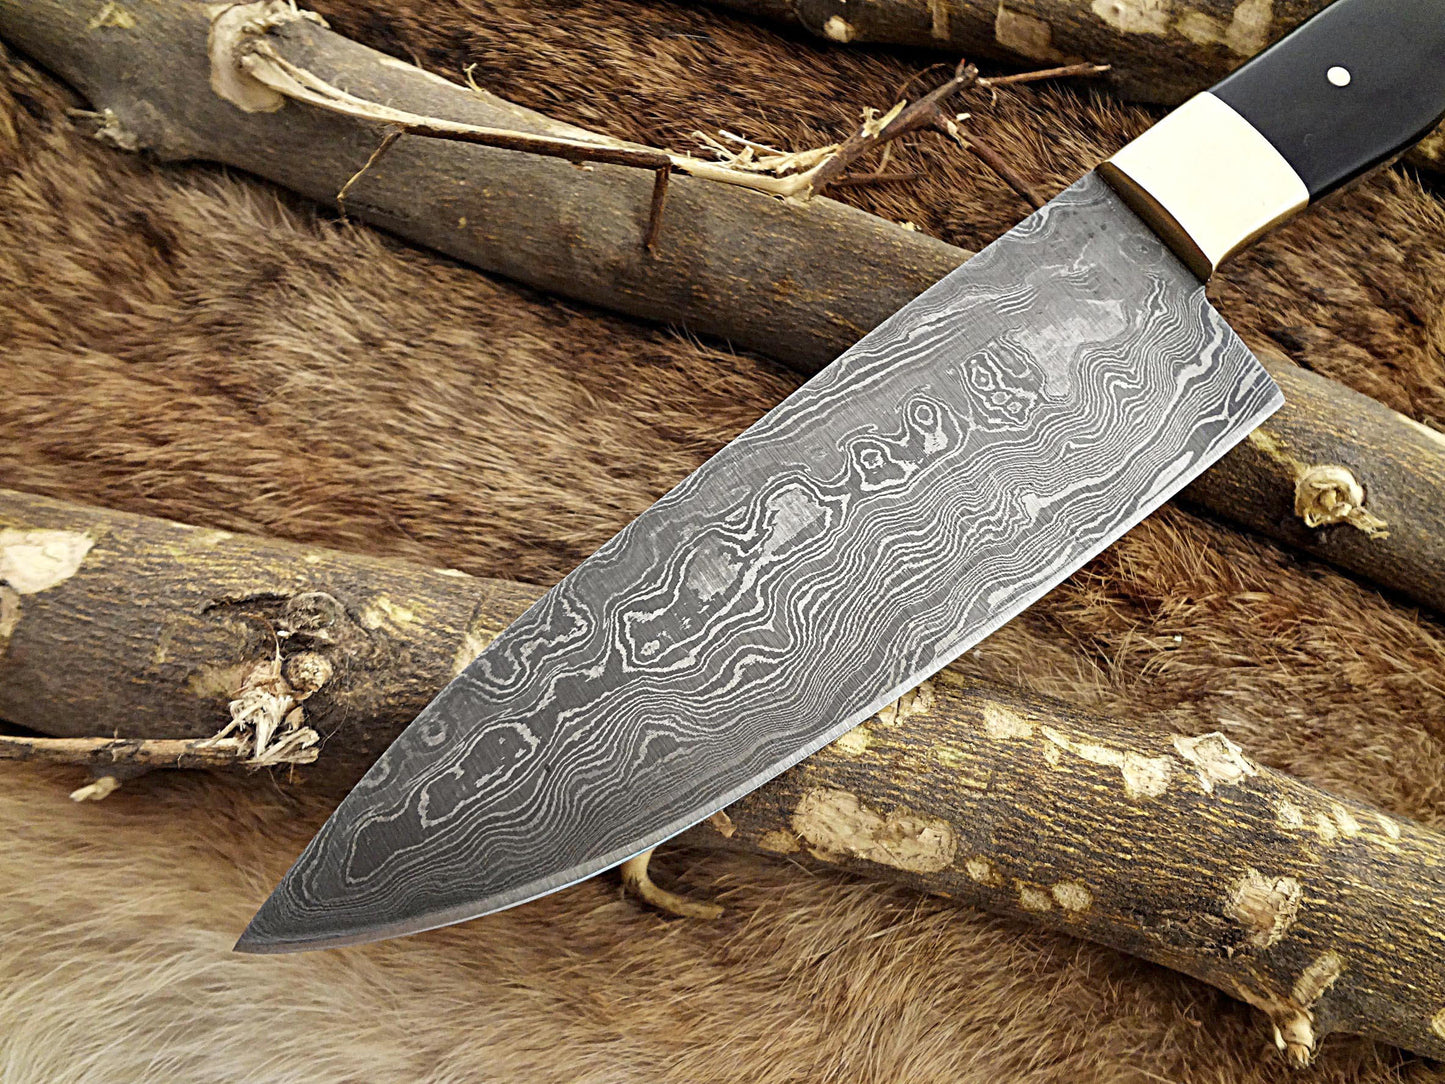 Damascus Steel 10 Inches kitchen Knife, 5.5" long full tang Hand Forged blade, Bull horn scale with brass bolster, 6 mm thick blade